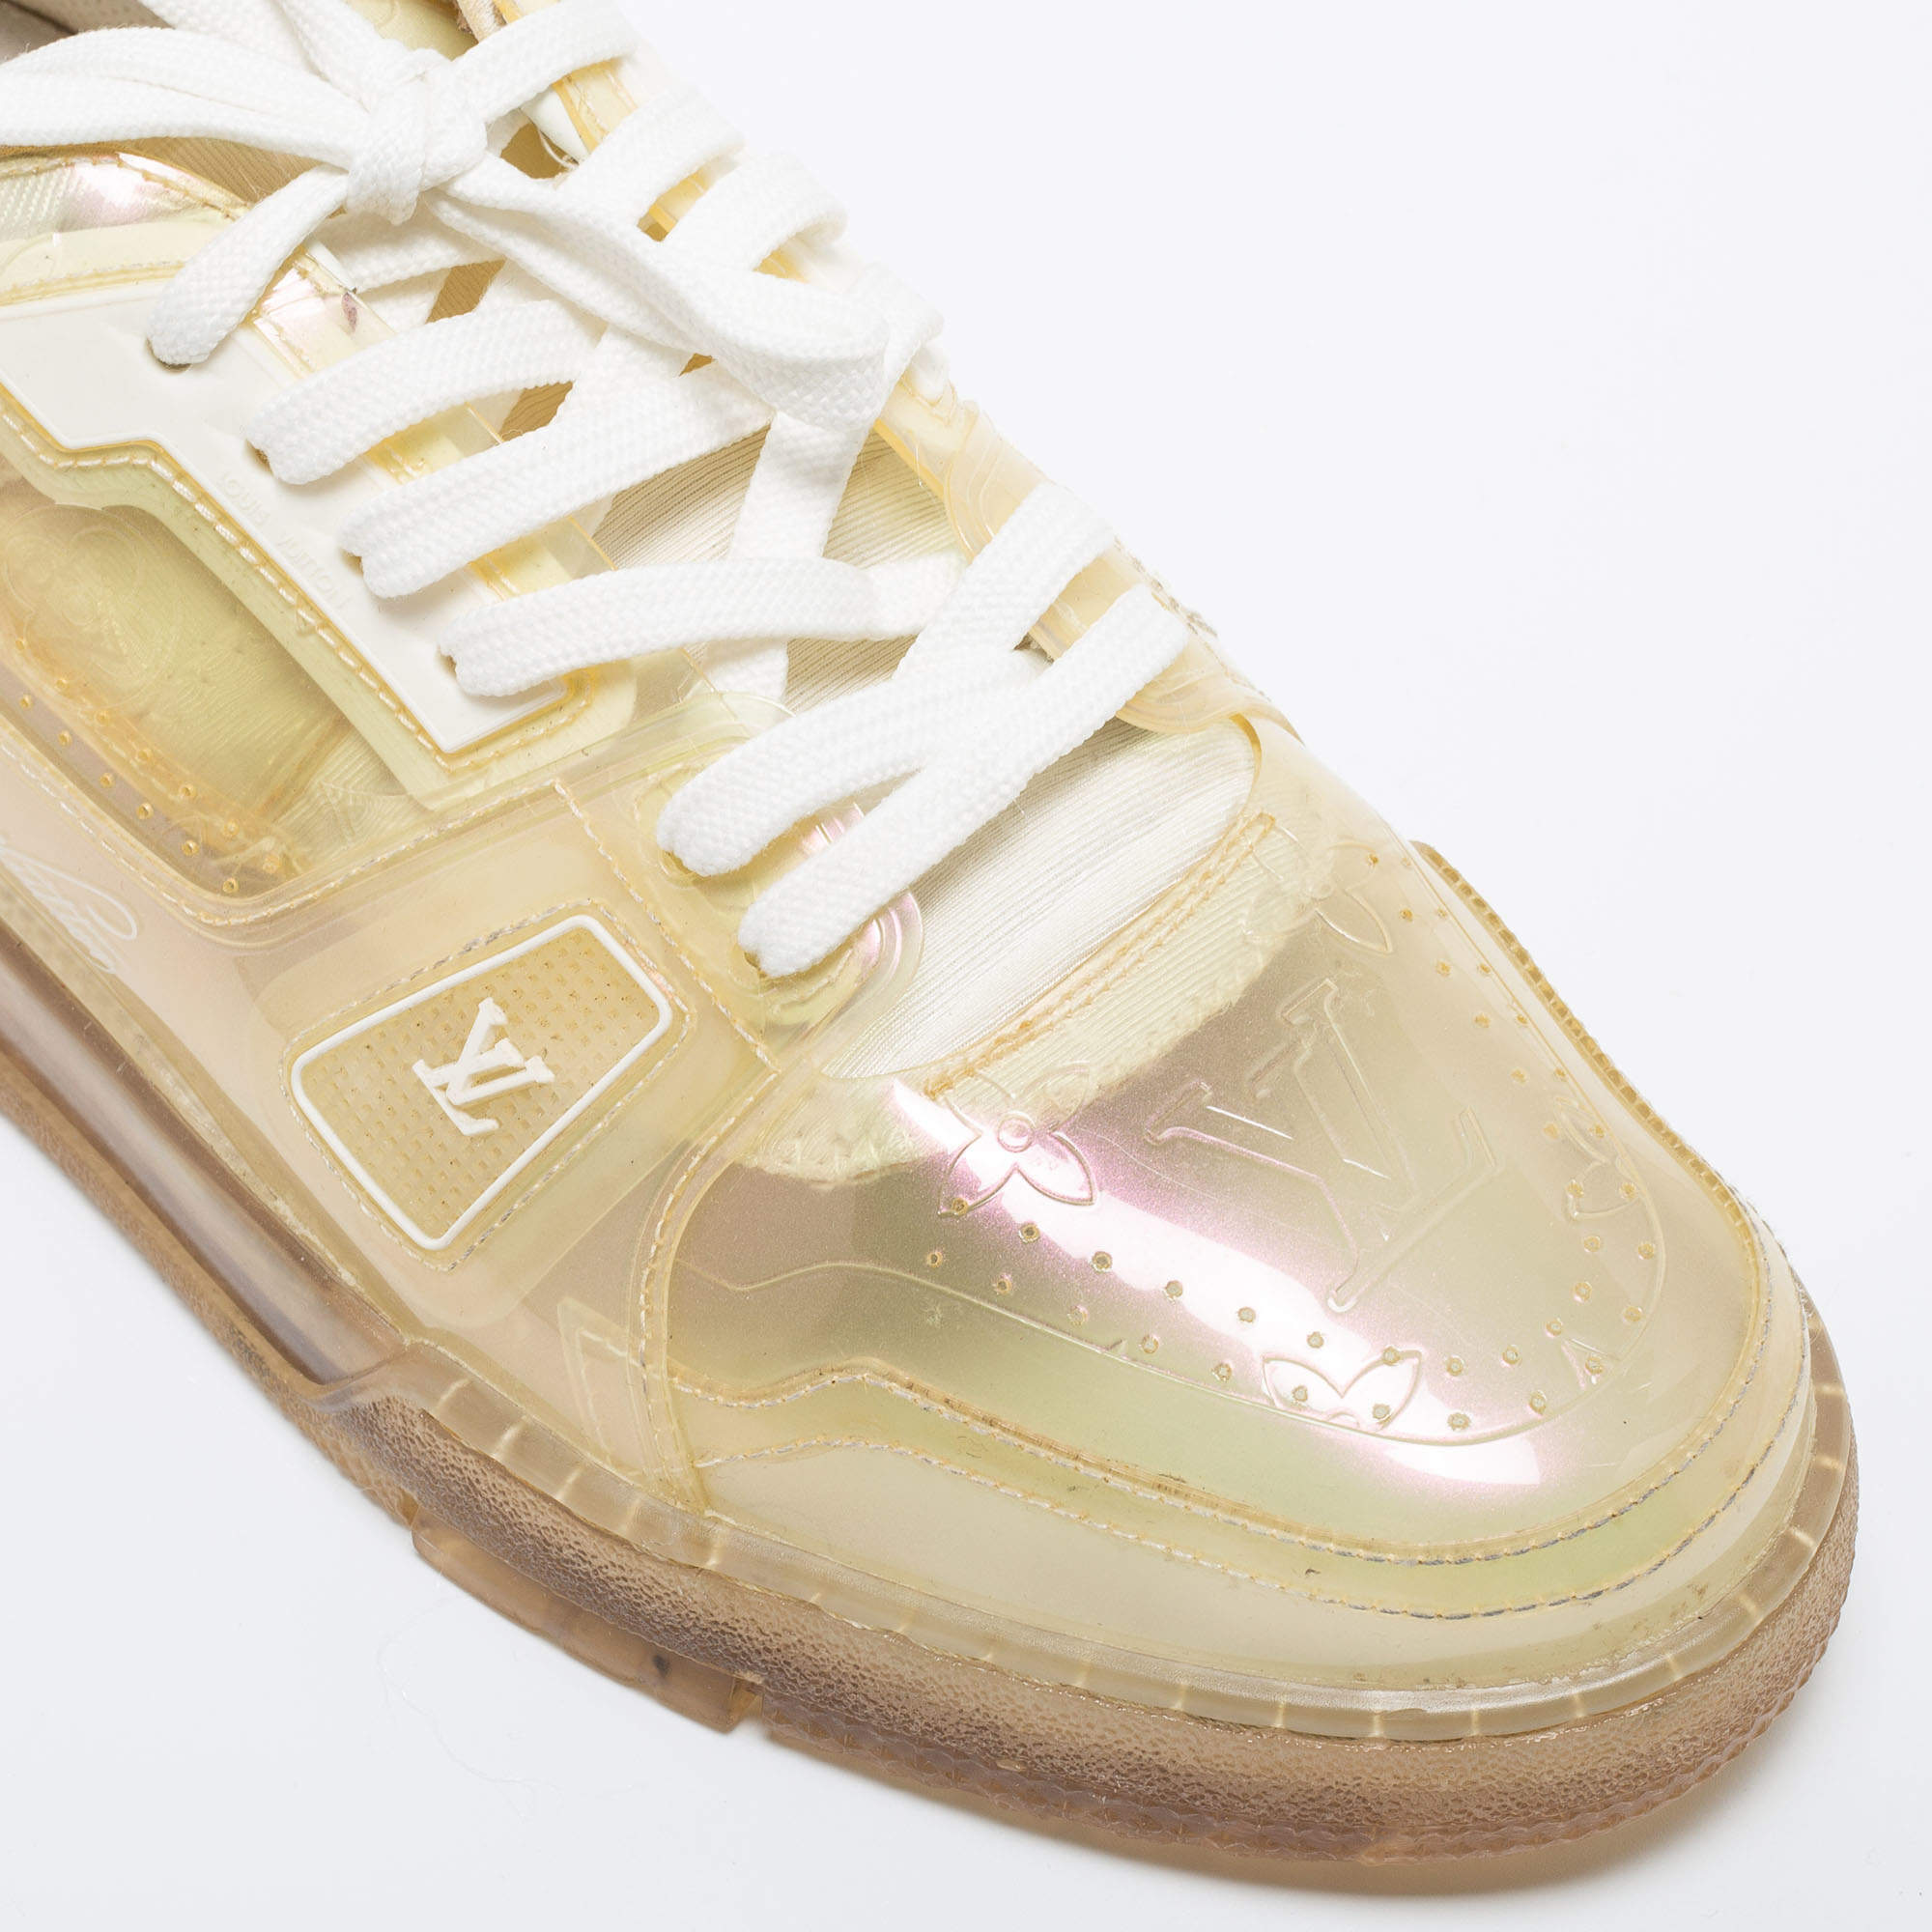 Louis Vuitton LV Trainer Transparent Sneakers w/ Tags - Clear Sneakers,  Shoes - LOU441190